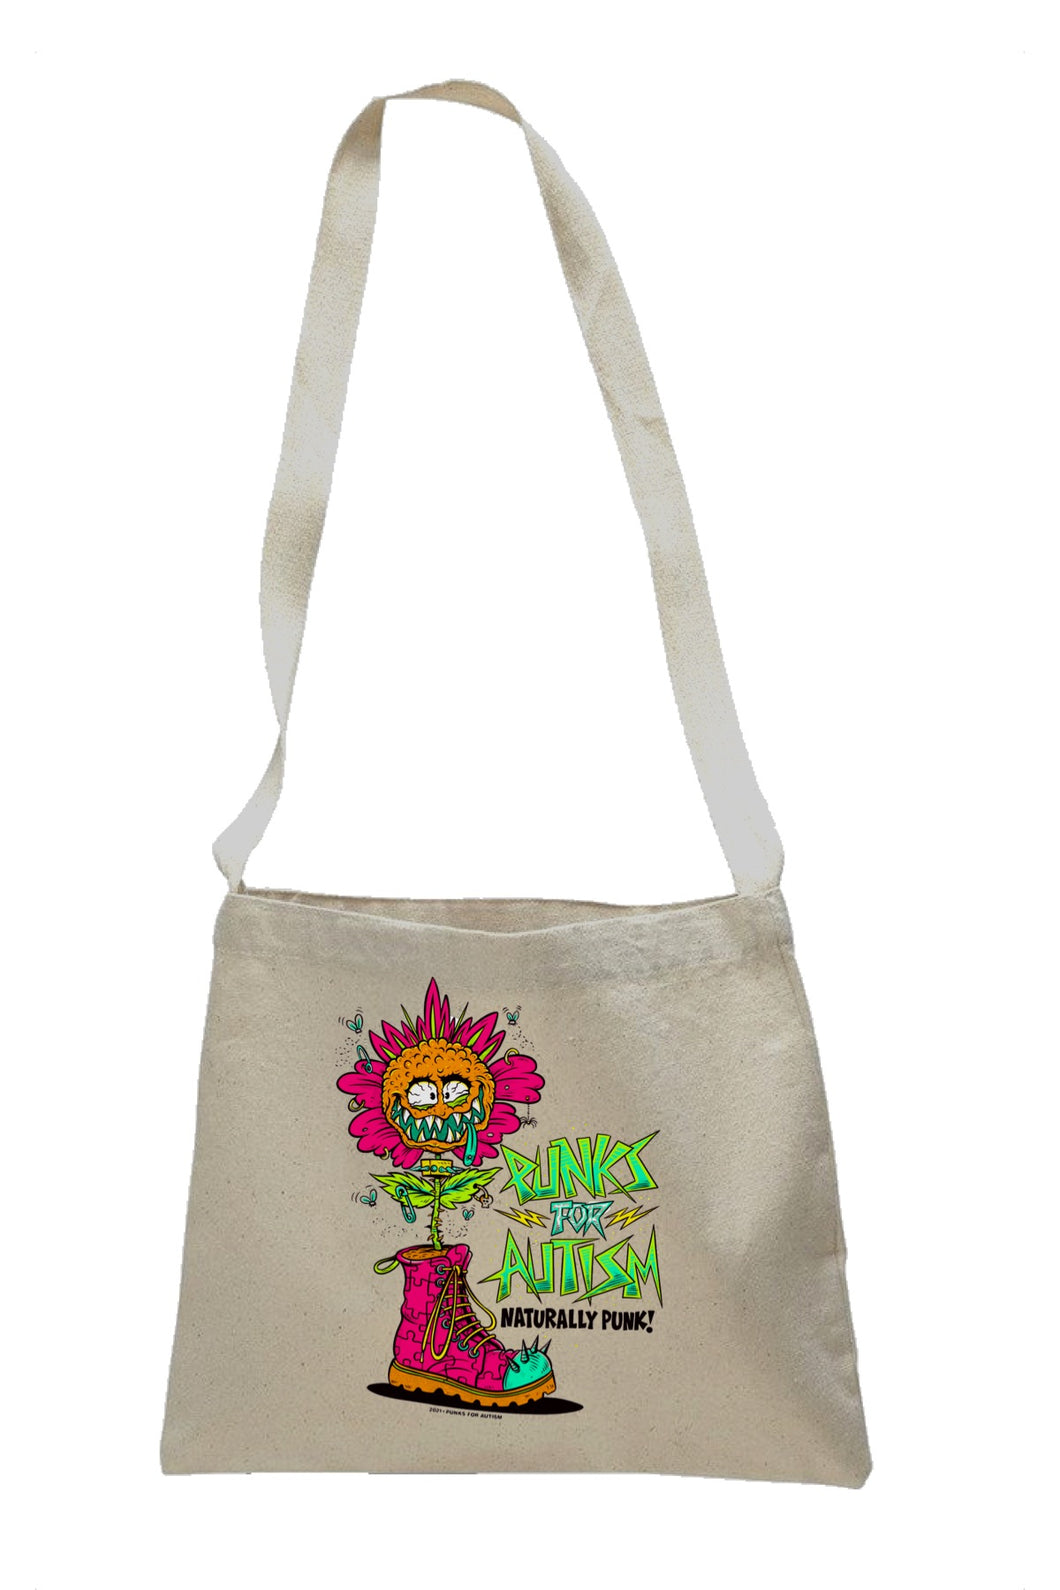 Punks for Autism - Tote Bag - Naturally Punk